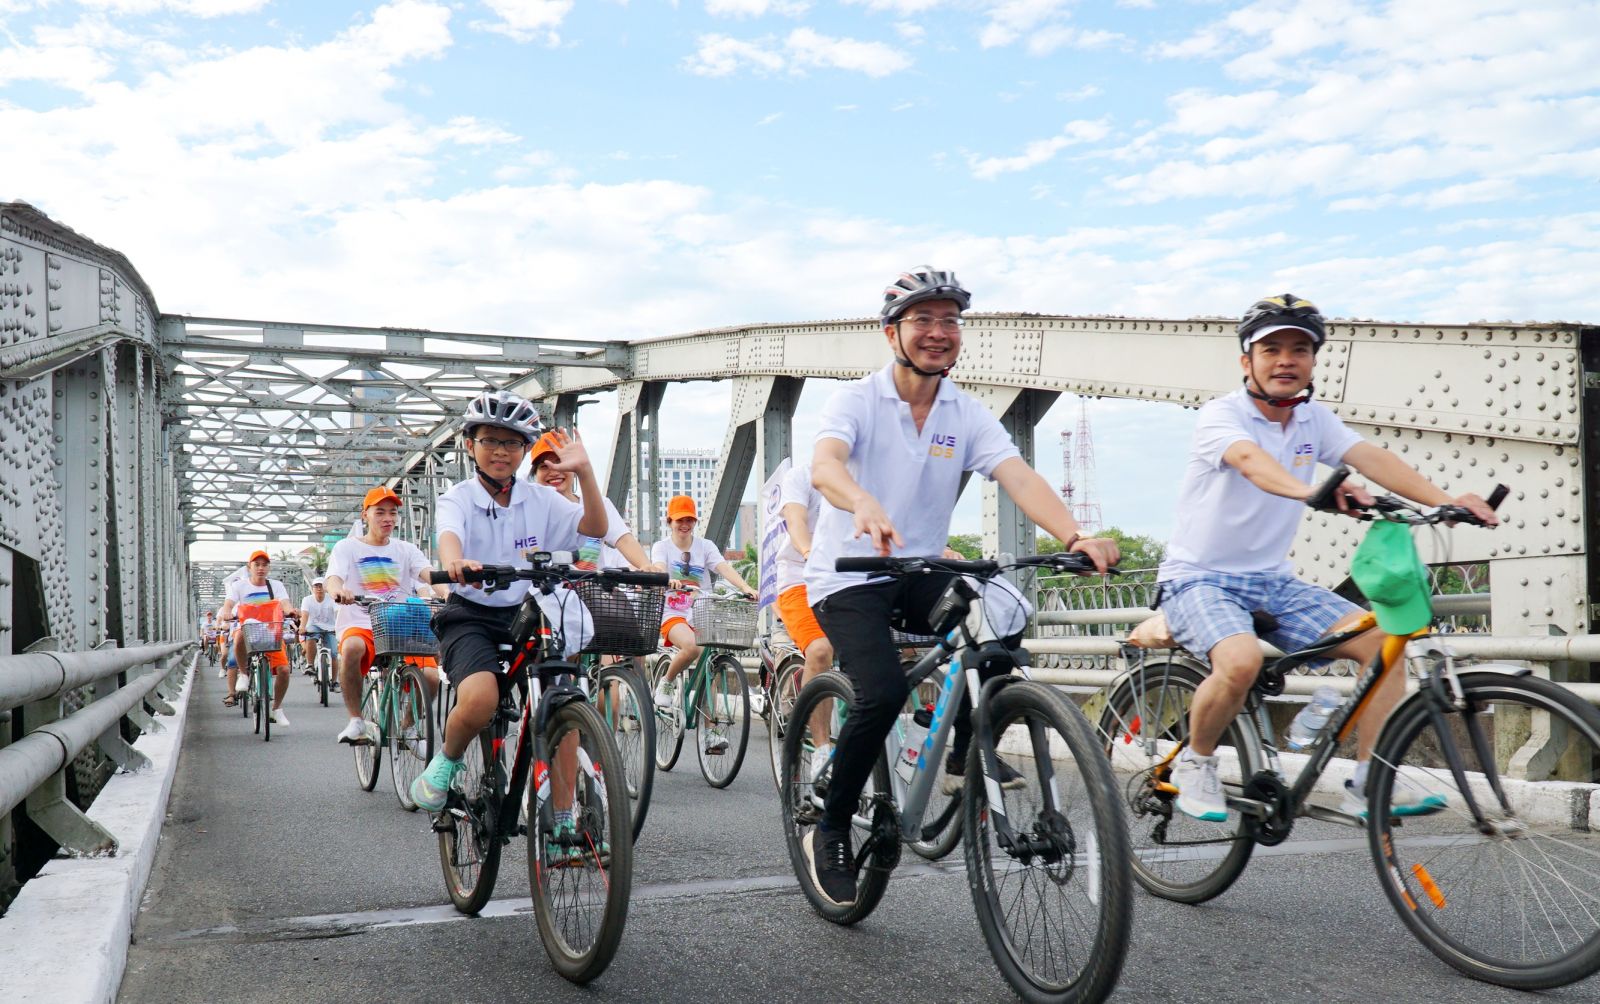 Family members cycling together is also one of the goals that the program aims at